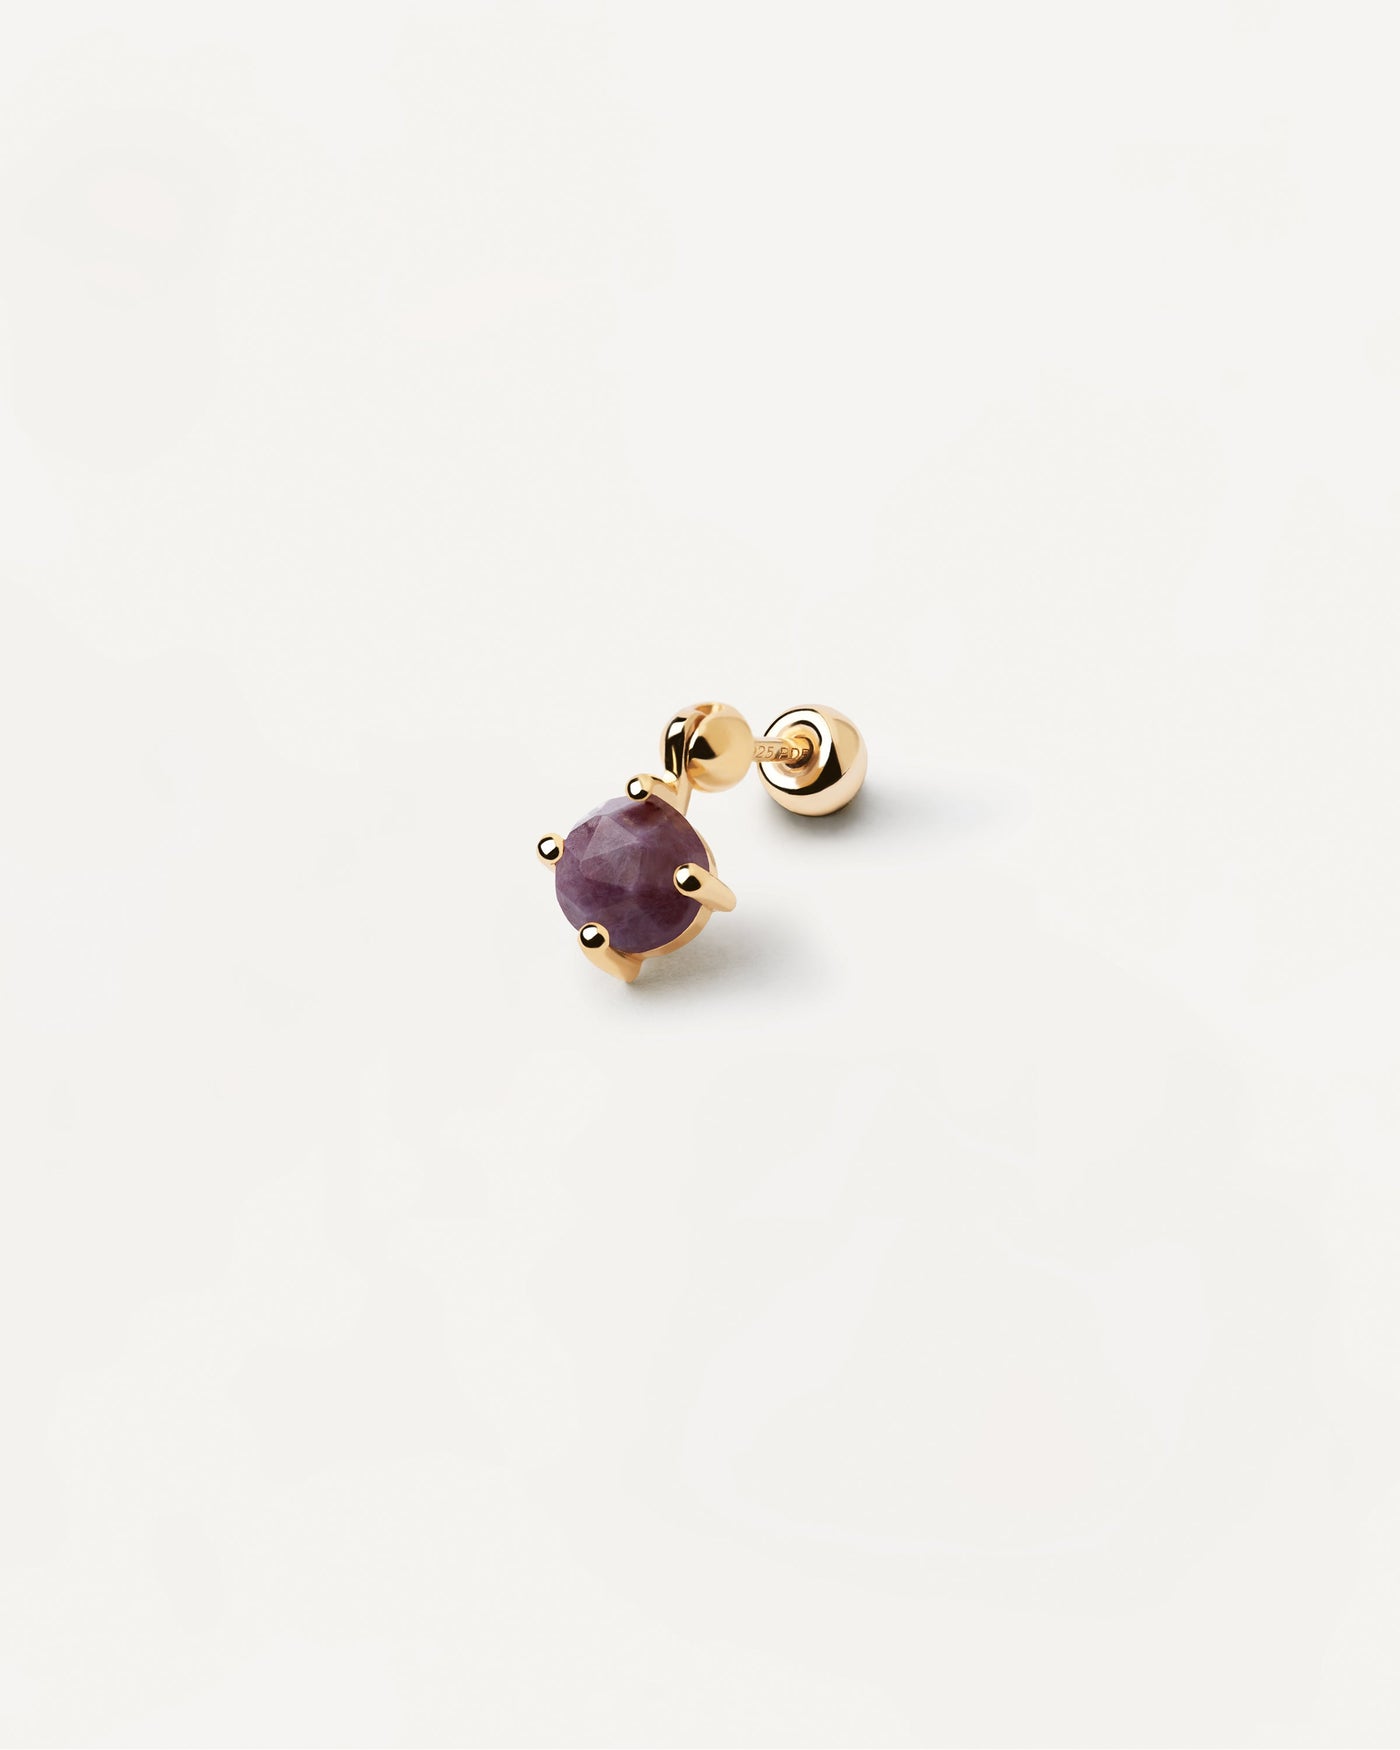 2023 Selection | Kimi Charoite Single Earring. Gold-plated ear piercing with purple gemstone pendant in round cut. Get the latest arrival from PDPAOLA. Place your order safely and get this Best Seller. Free Shipping.